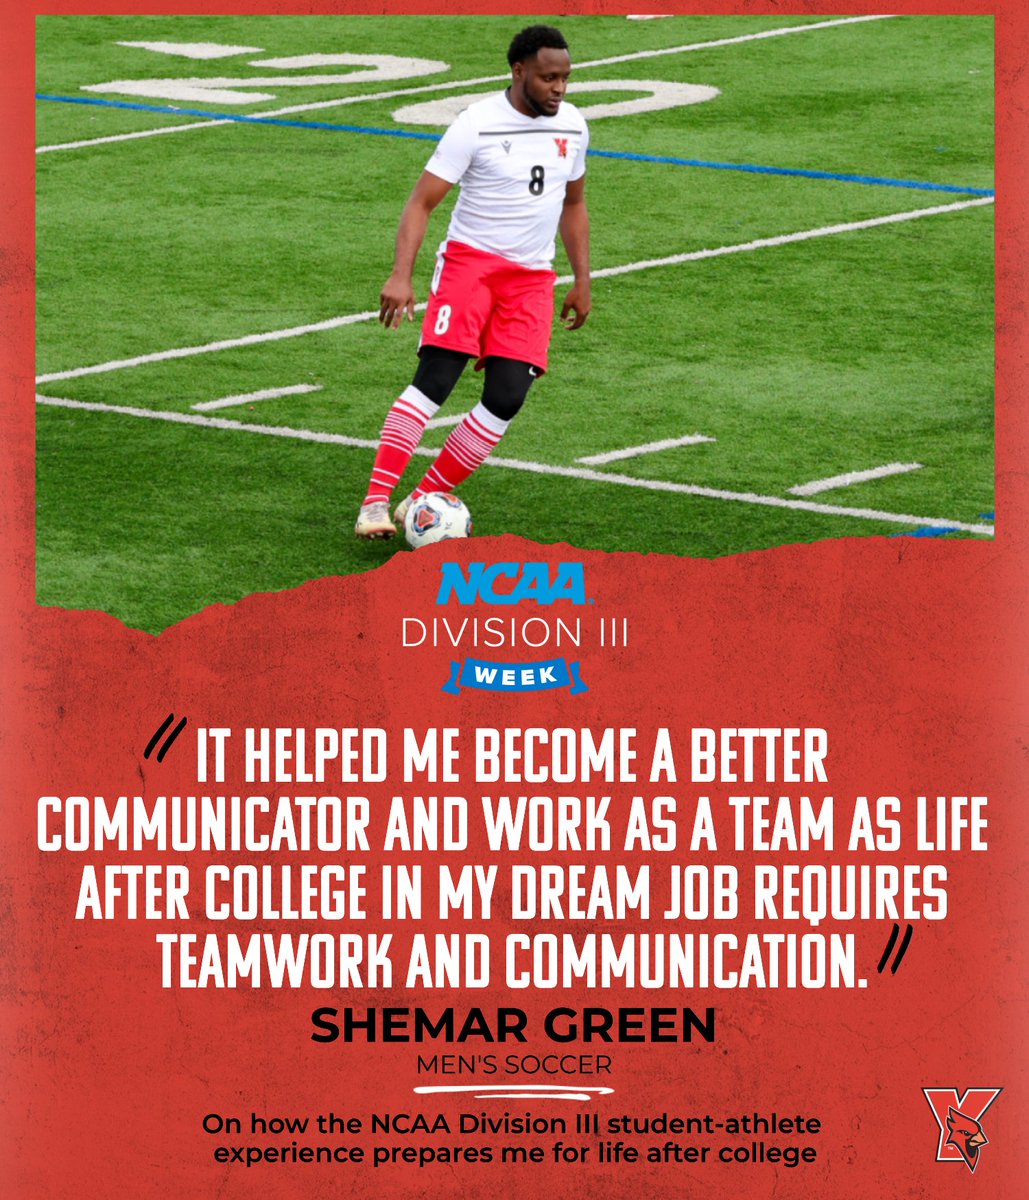 Shemar Green of @YorkCollegeCUNY Men's ⚽️ shares how an @NCAA @NCAADIII student-athlete experience prepares him for life after college 📈

#D3Week #YCCardinals #RiseAbove #TheCardinalWay #WeAreOneYork #NCAAD3 #whyD3 #myD3